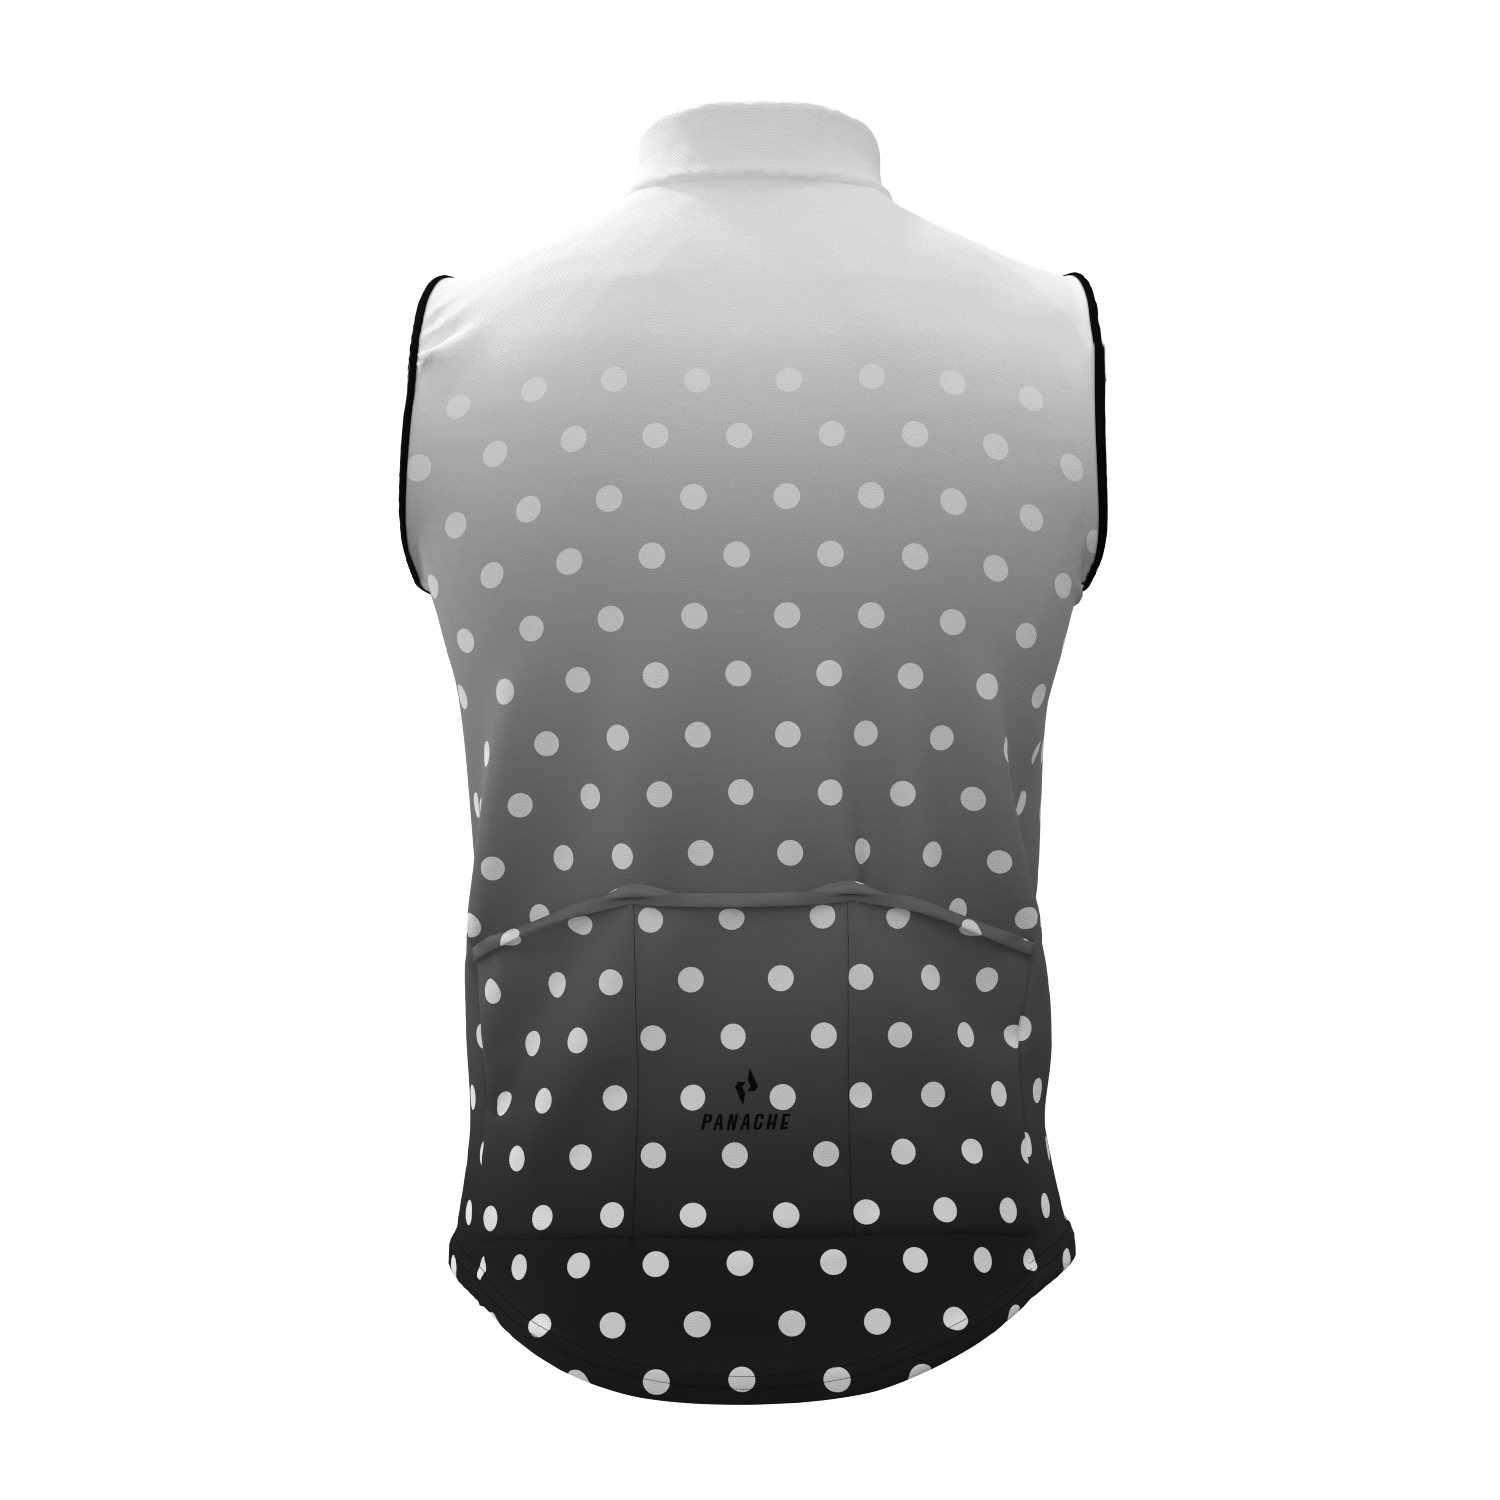 M's and W's Pro Thermal Vest - Black & White Fade Dots